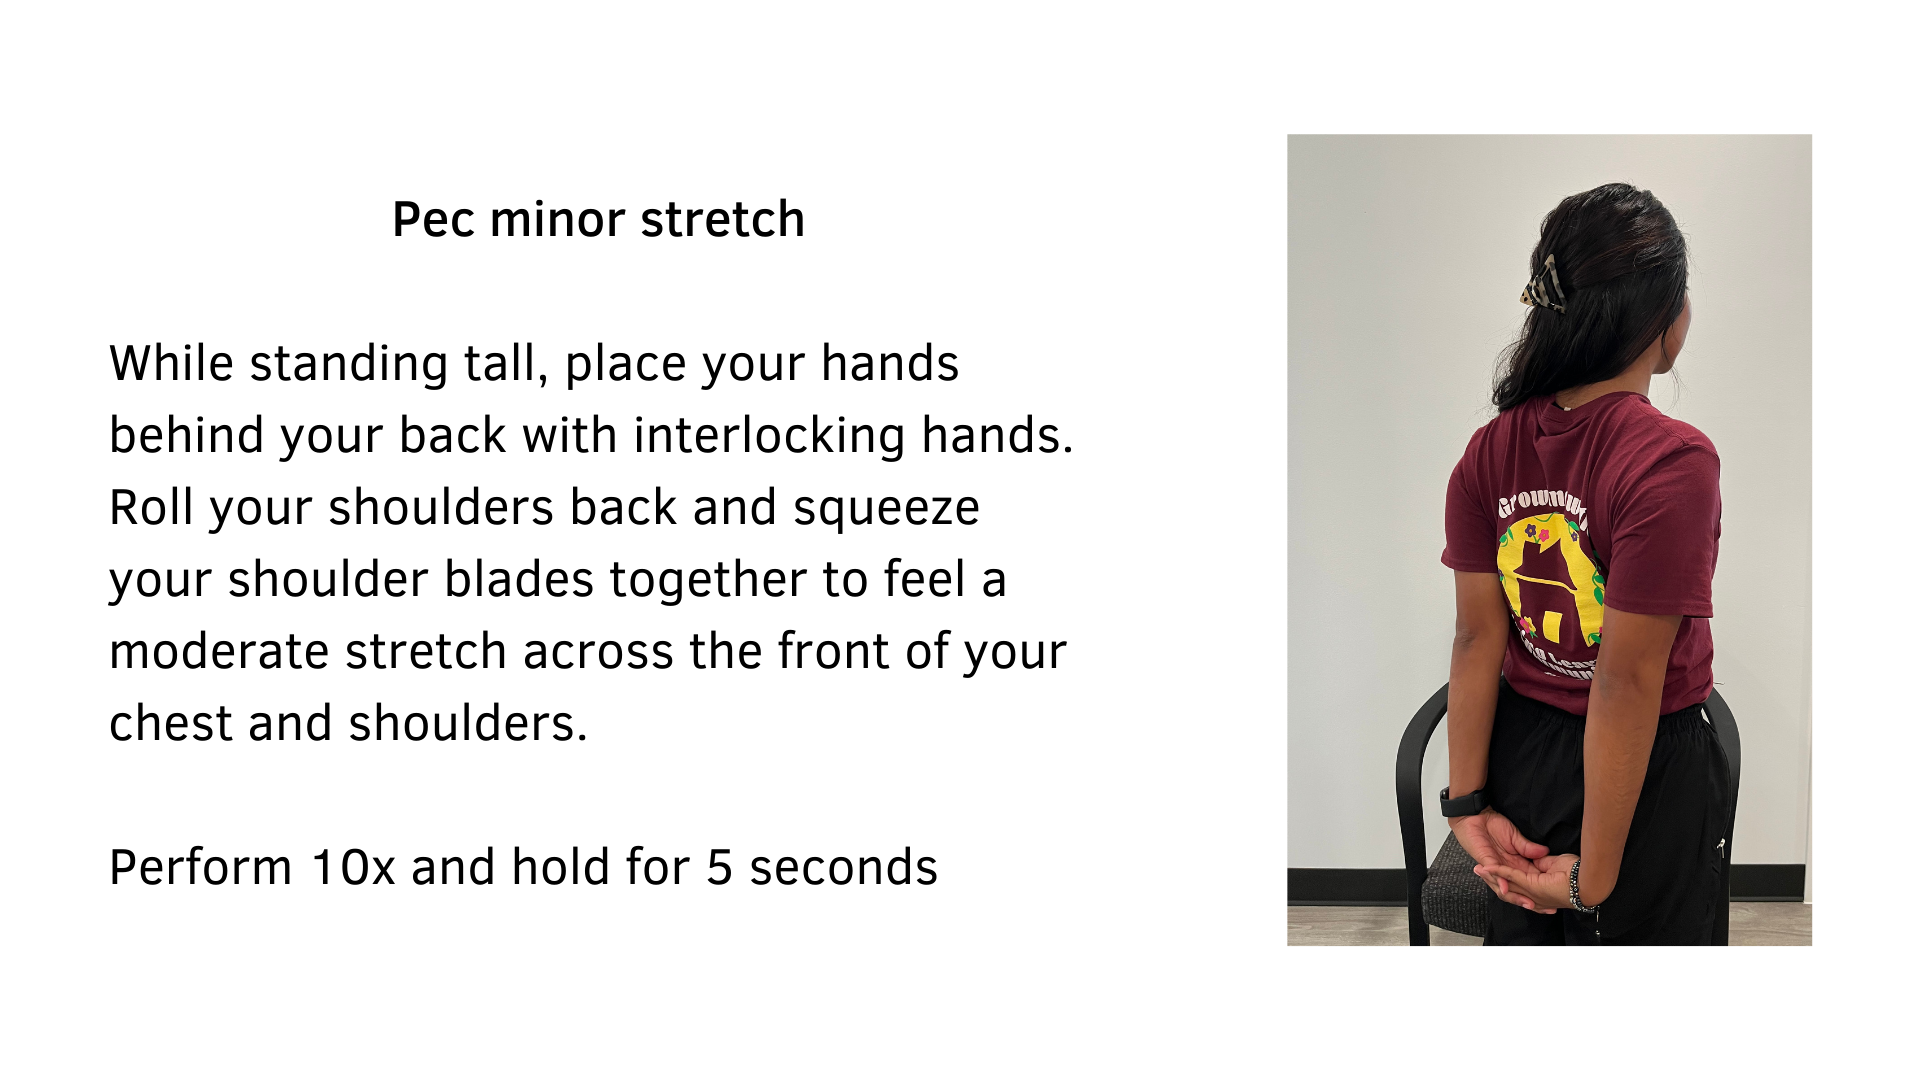 Black text on a white background that reads, "Pec minor stretch: While standing tall, place your hands behind your back with interlocking hands. Roll your shoulders back and squeeze your shoulder blades together to feel a moderate stretch across the front of your chest and shoulders. Perform 10x and hold for 5 seconds". A picture of a woman from the back performing the stretch is featured.